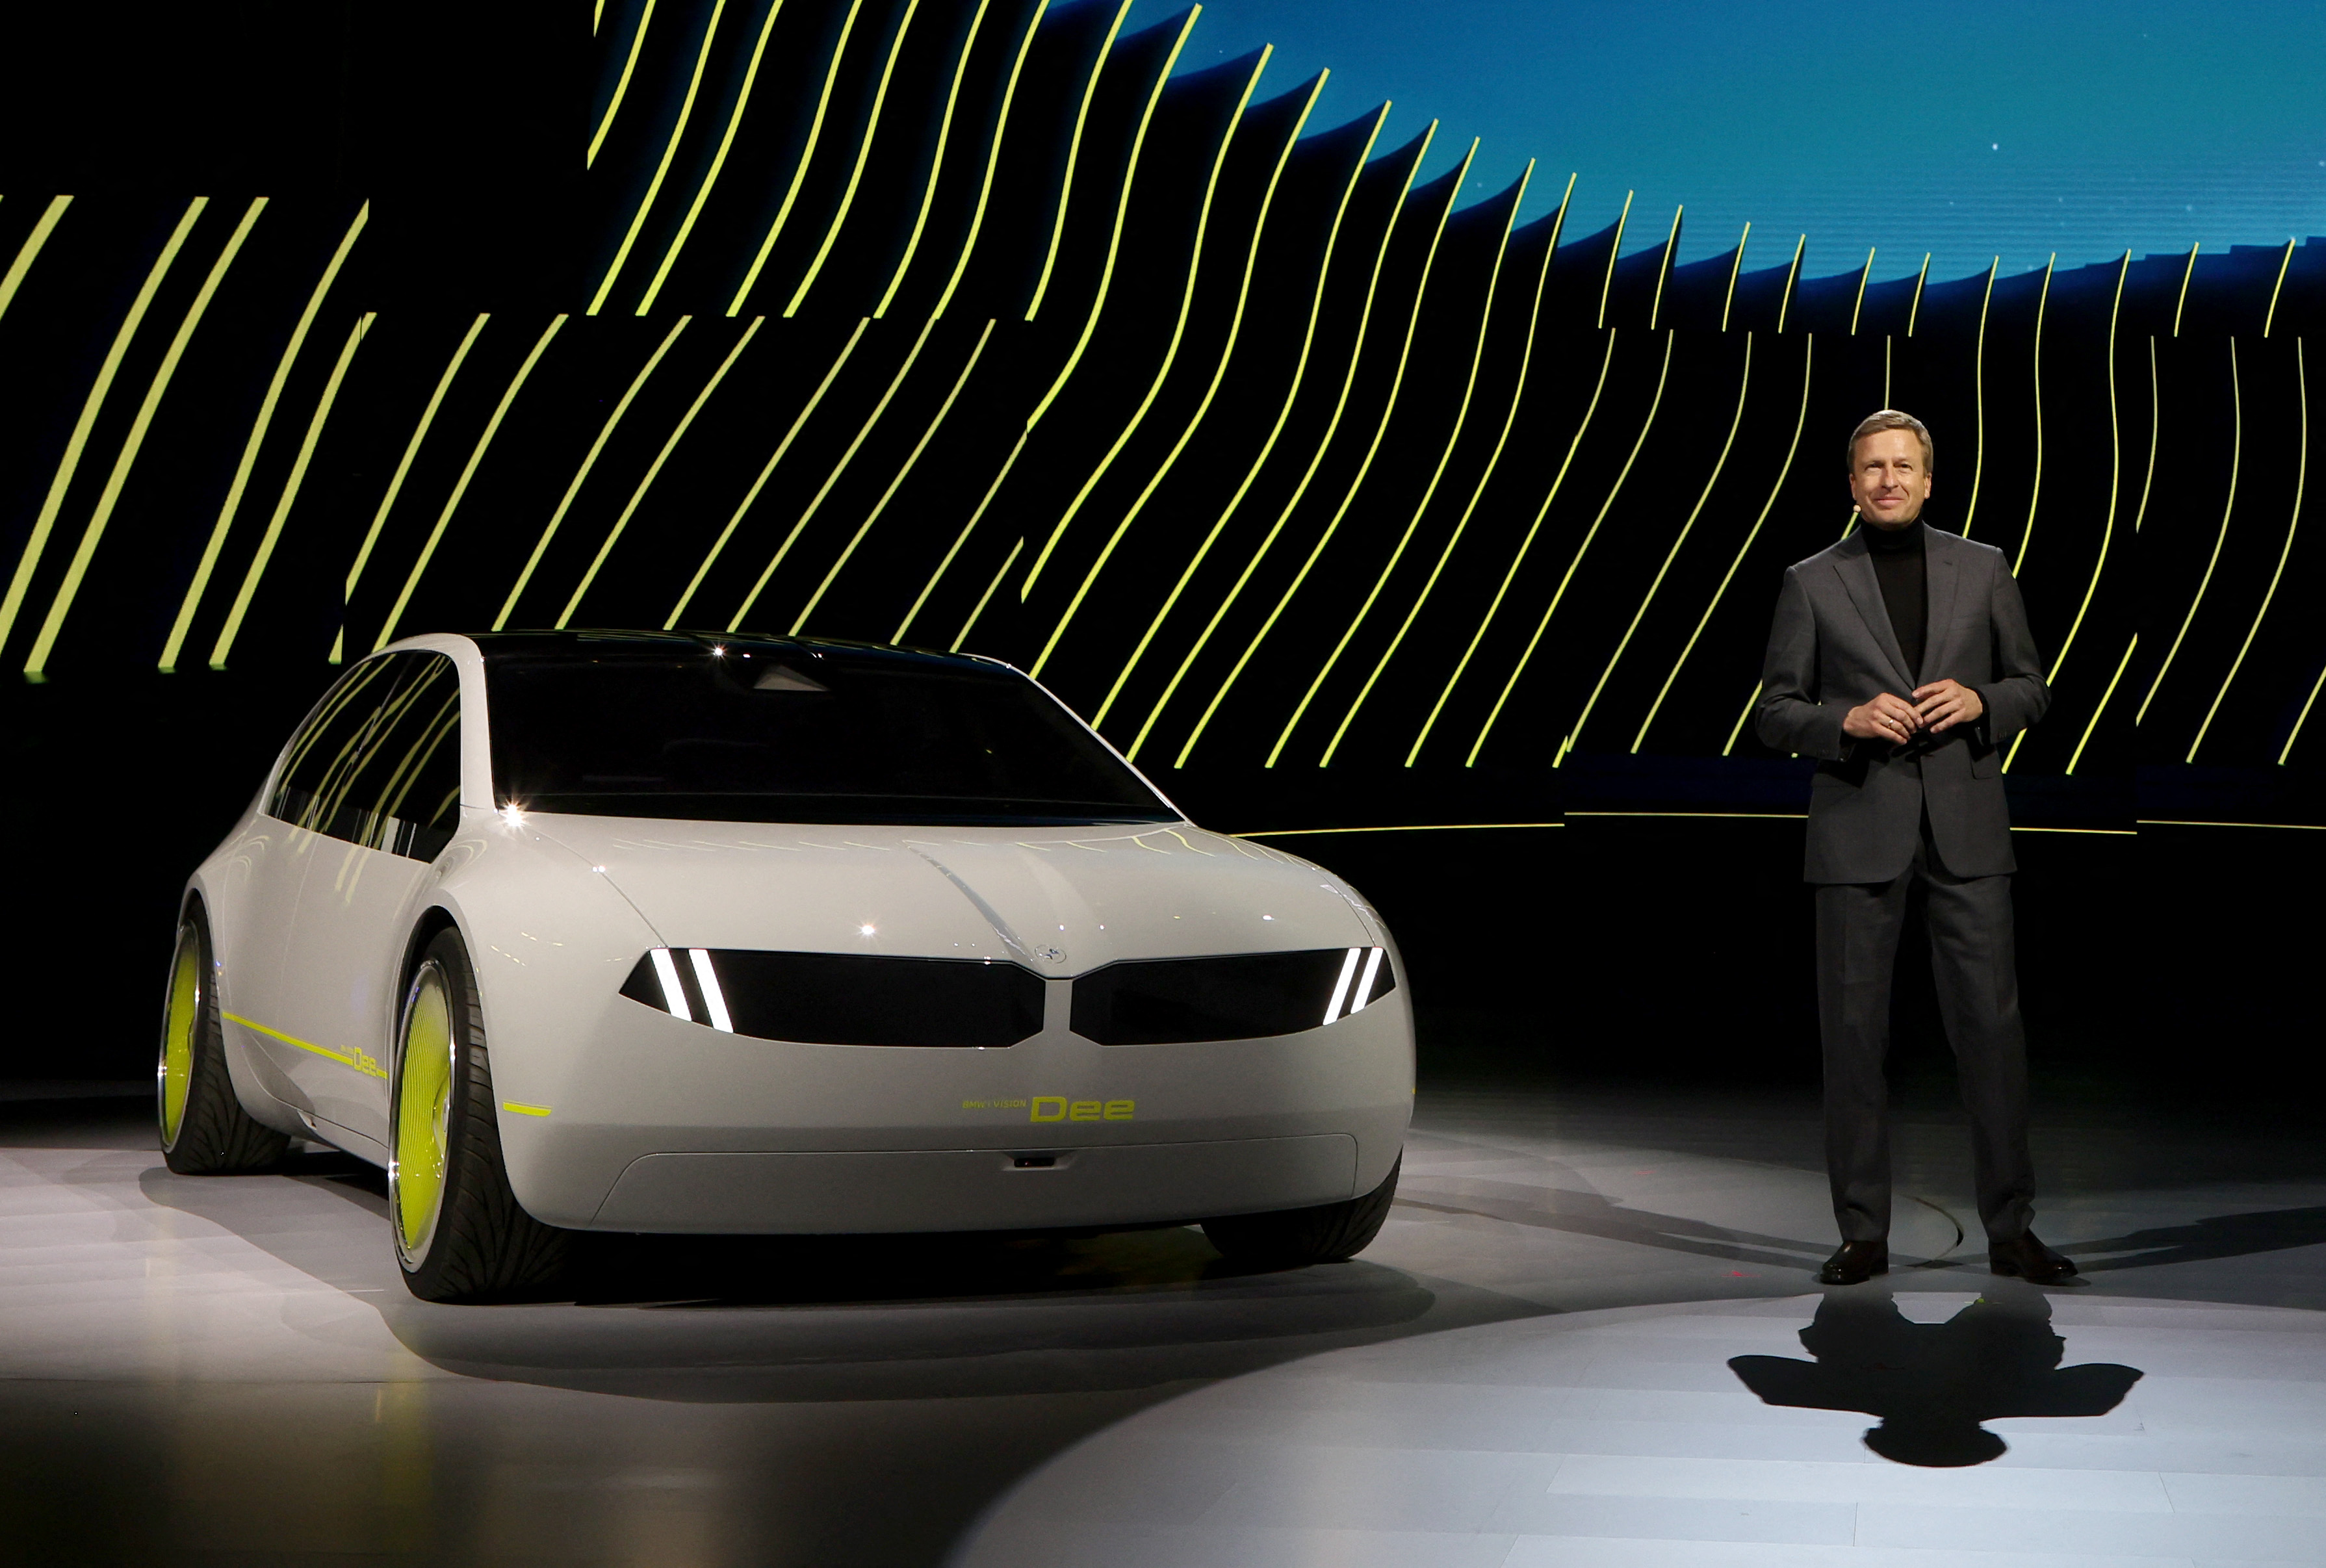 BMW's board chairman Oliver Zipse introduces the BMW i Vision Dee (Digital Emotional Experience) concept EV sport sedan during at CES 2023 in Las Vegas. /Ethan Miller/Getty Images/AFP